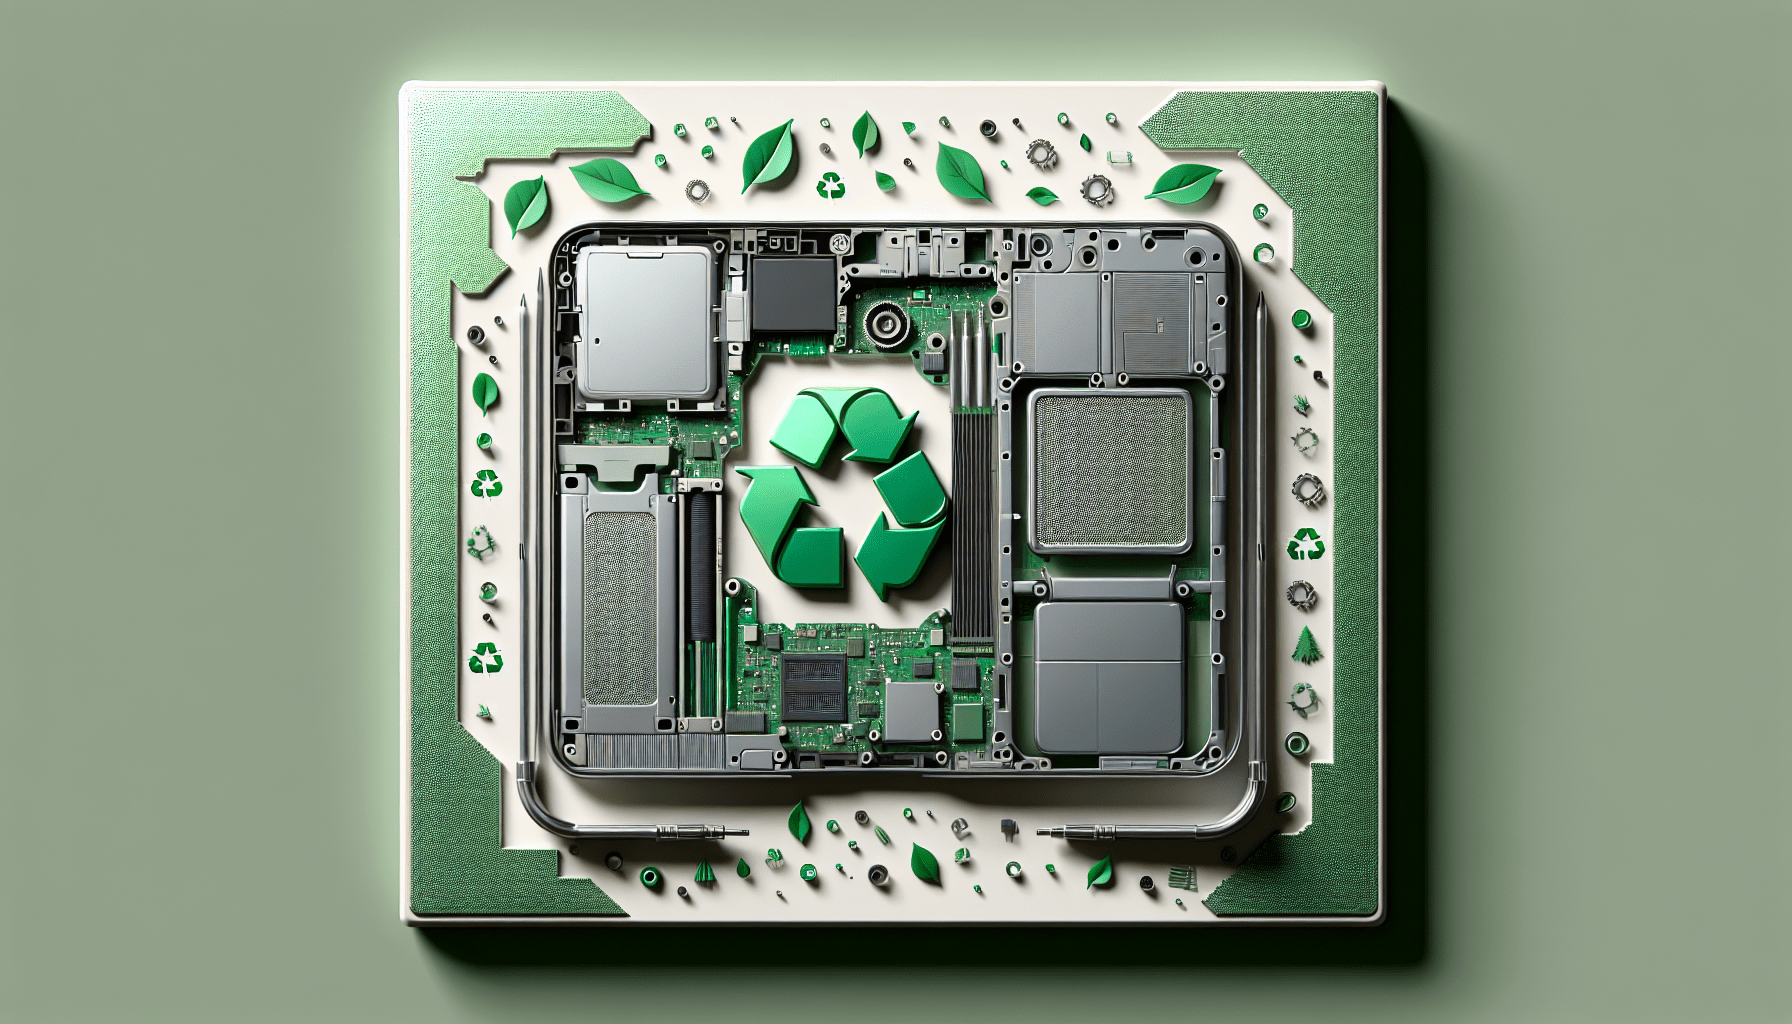 What Are The Best Practices For Reducing E-waste?